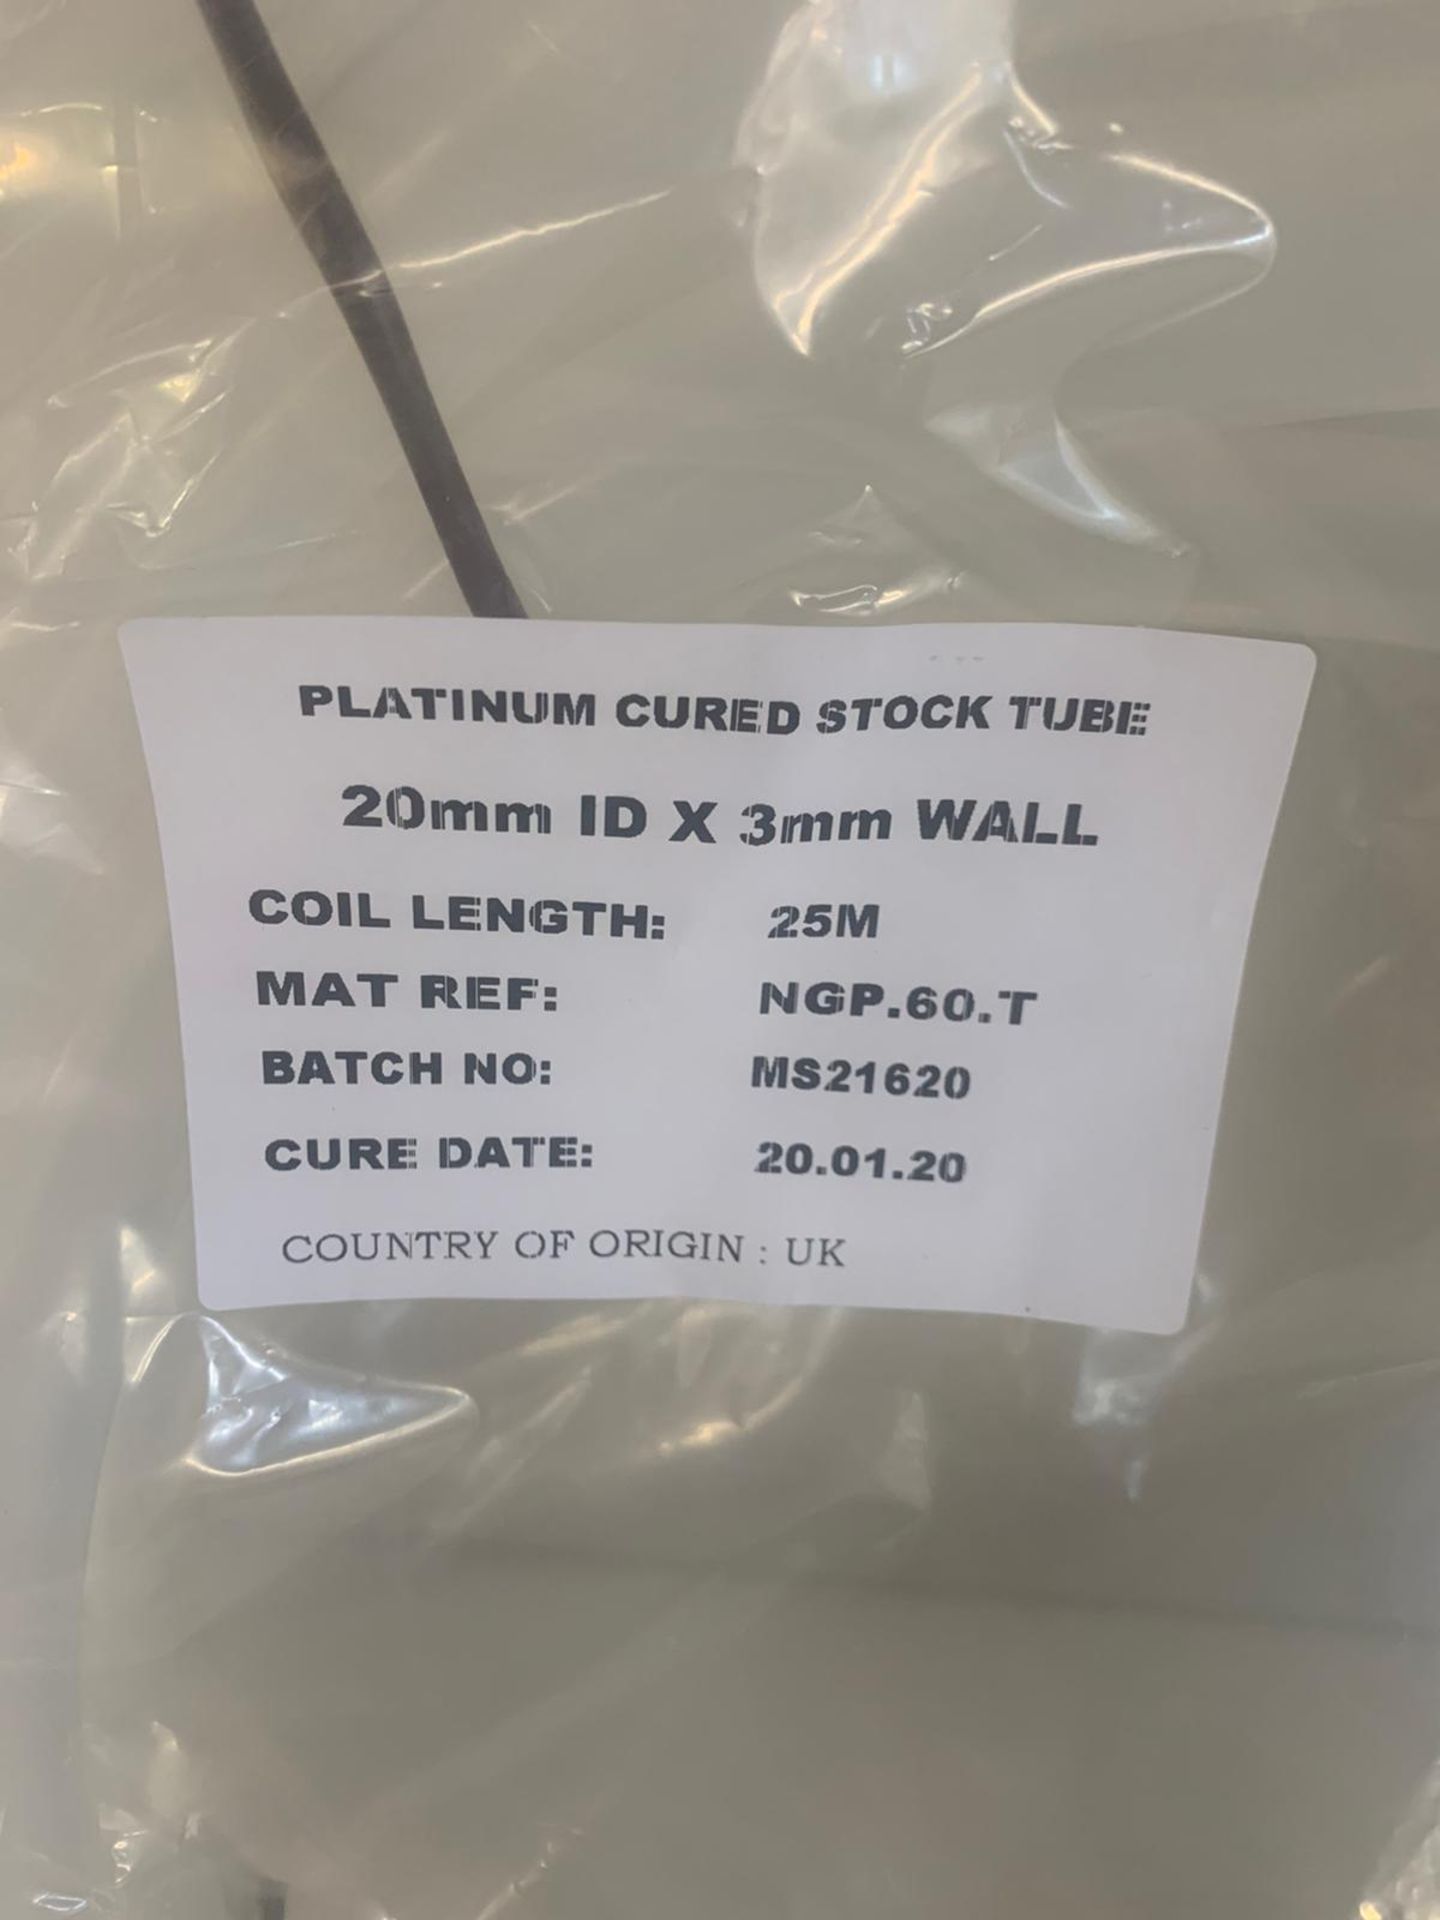 2 x Reels of Platinum Cured Stock Tube - Image 2 of 2